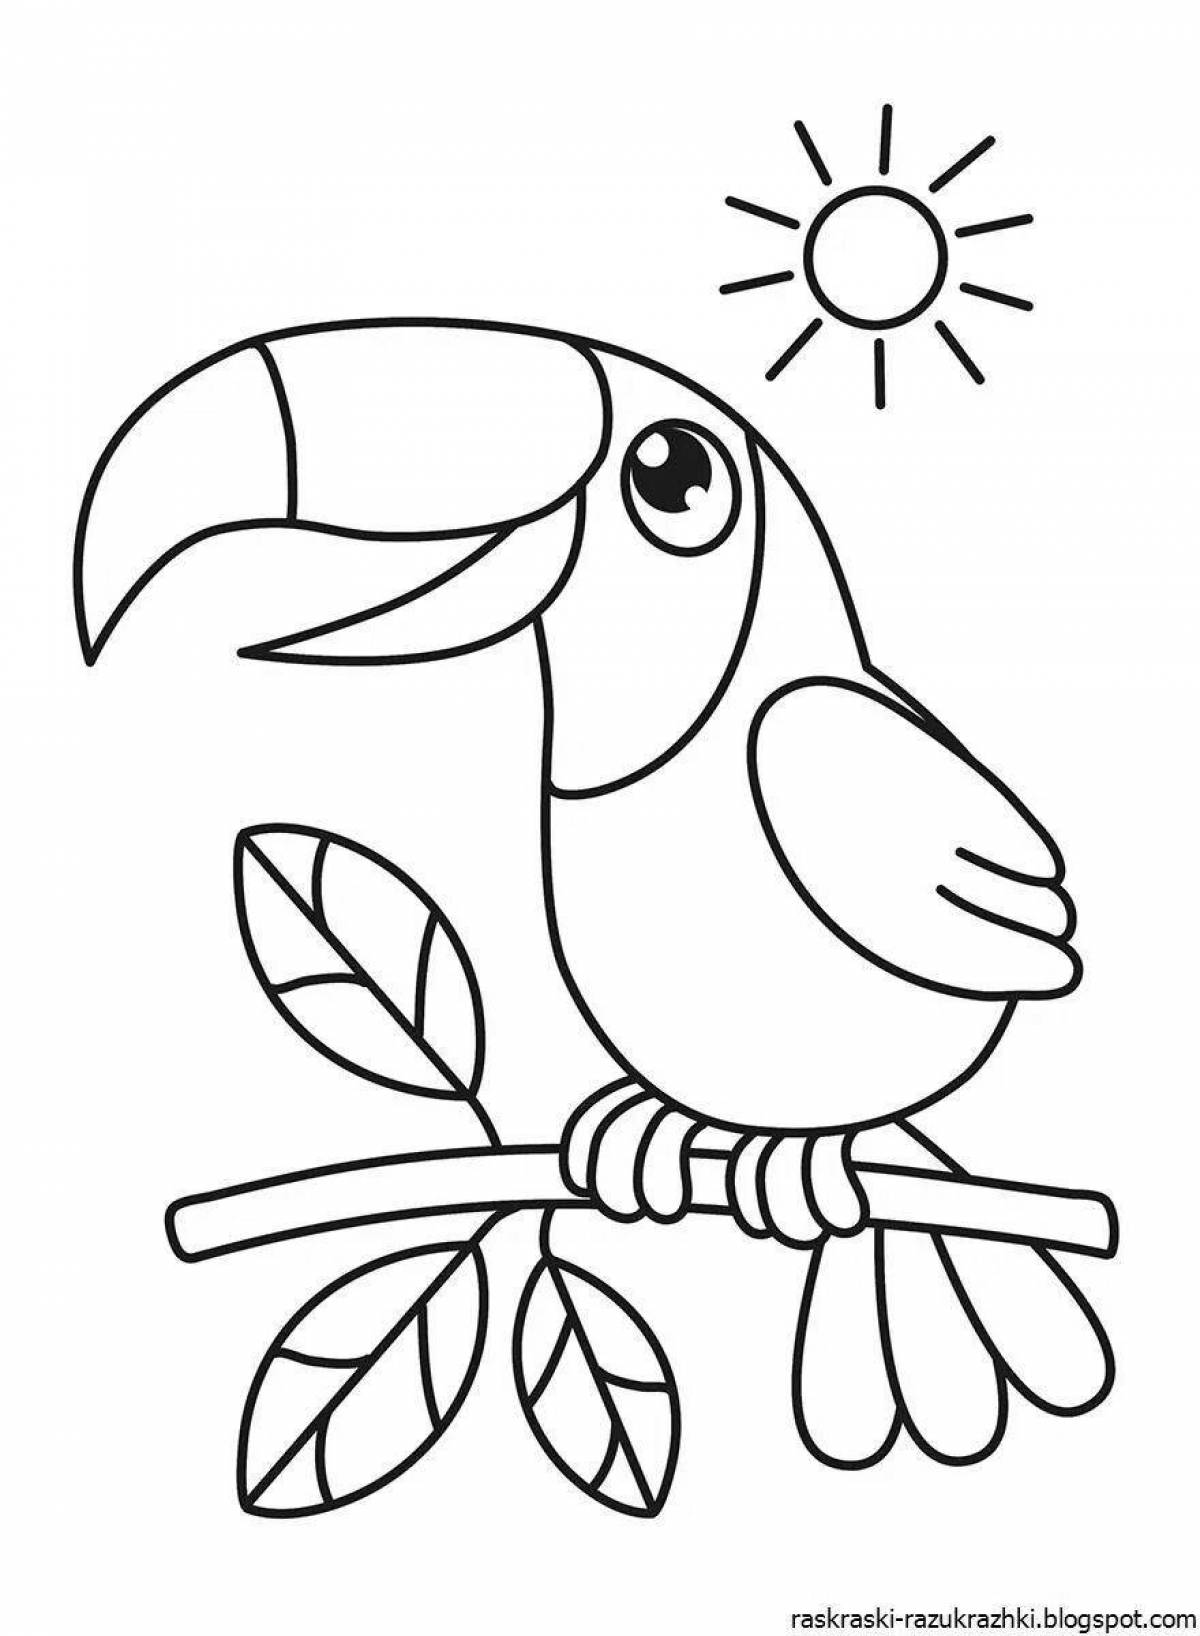 Fun coloring book with birds for kids